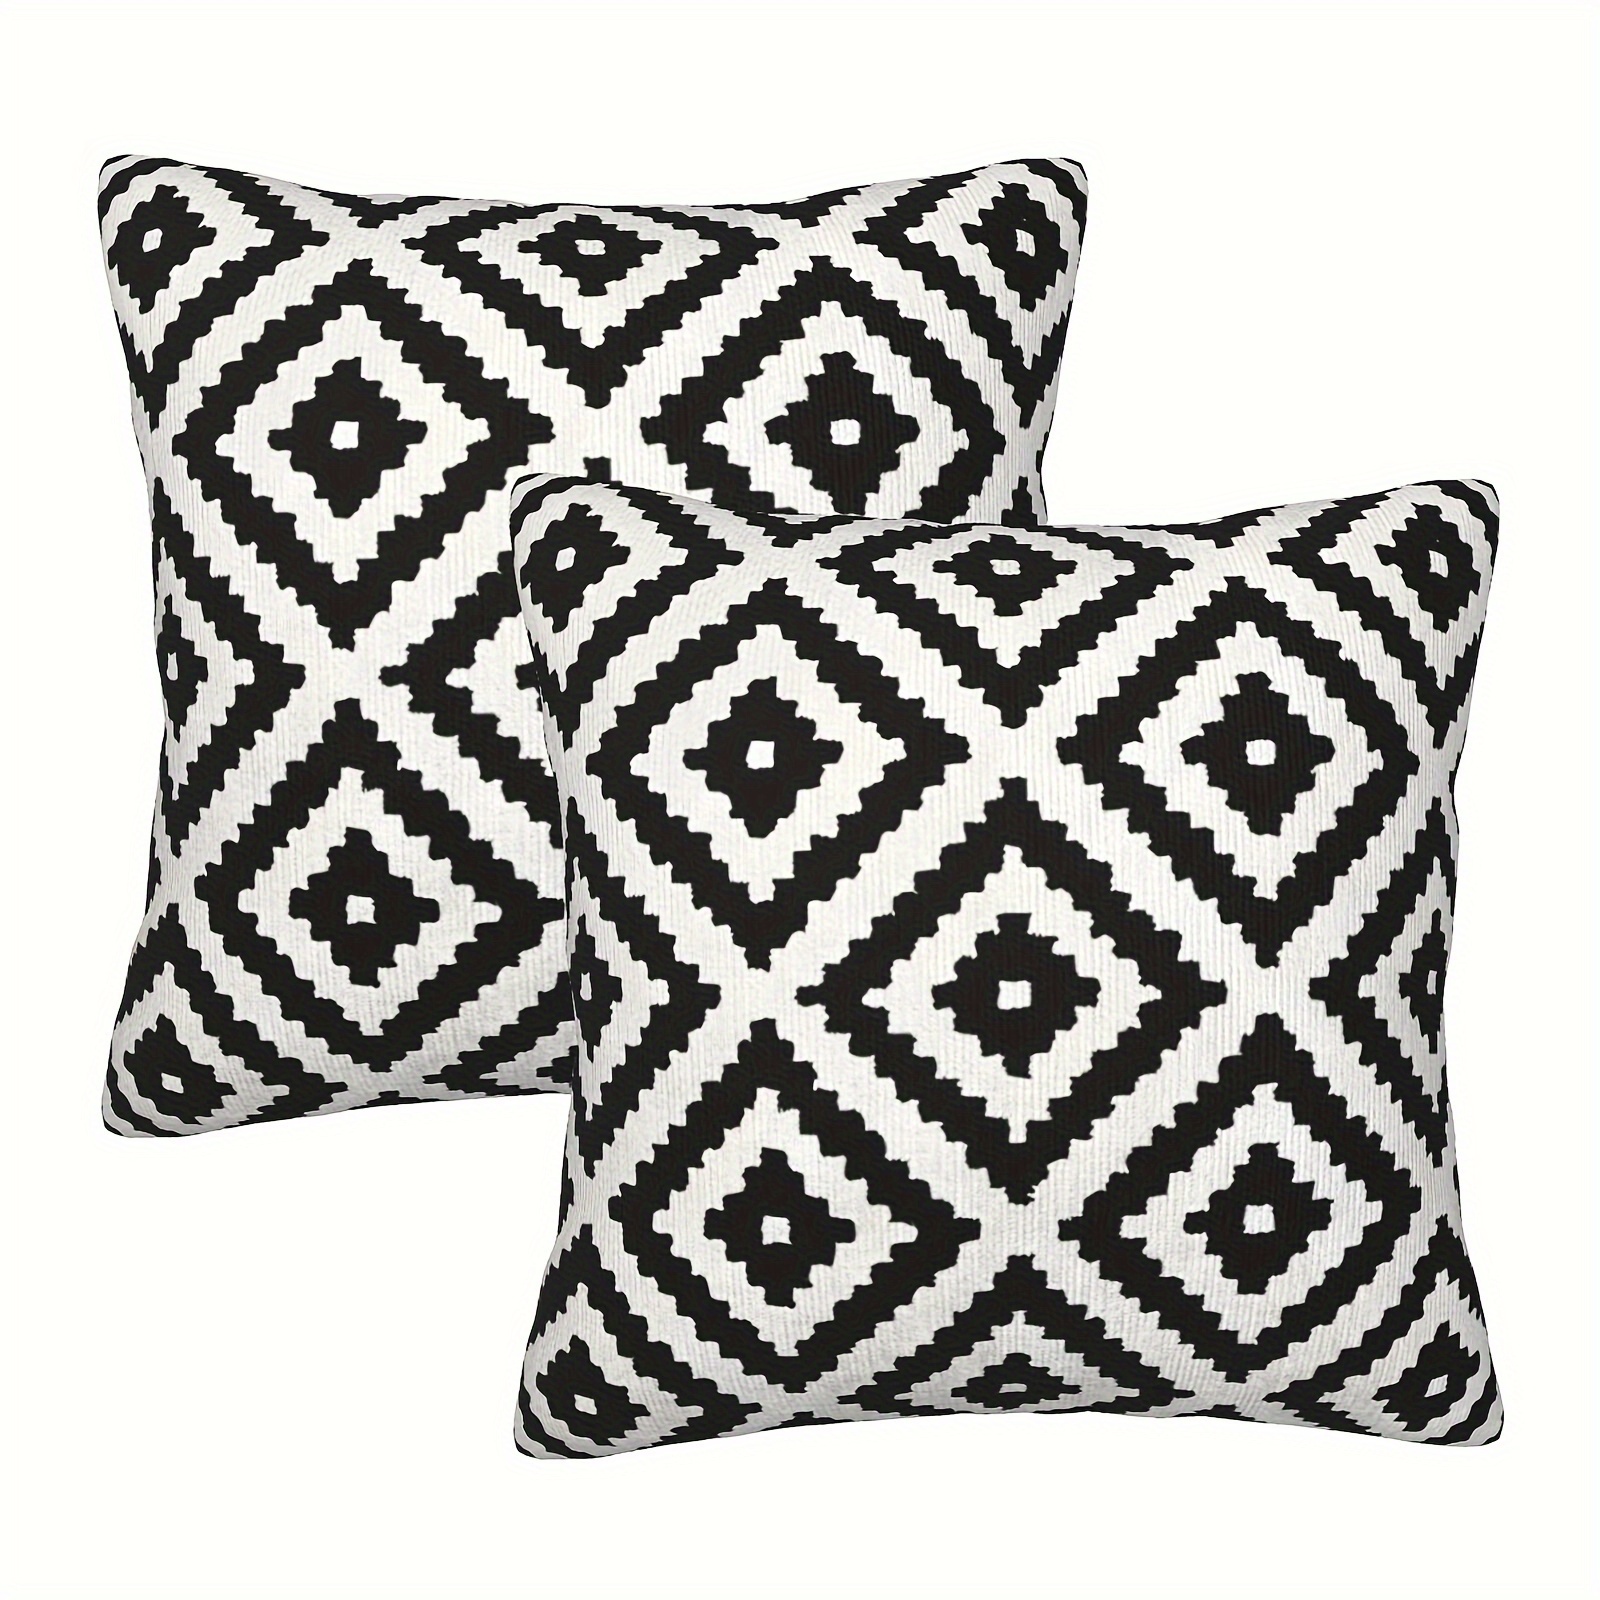 

2pcs, Short Plush Geometric Throw Pillow Covers, 18x18 Inch, Black And White Square Cushion Covers, Modern Stripe Line Home Decor, Artistic Retro Style Decorative Pillowcases (no Pillow Core Included)